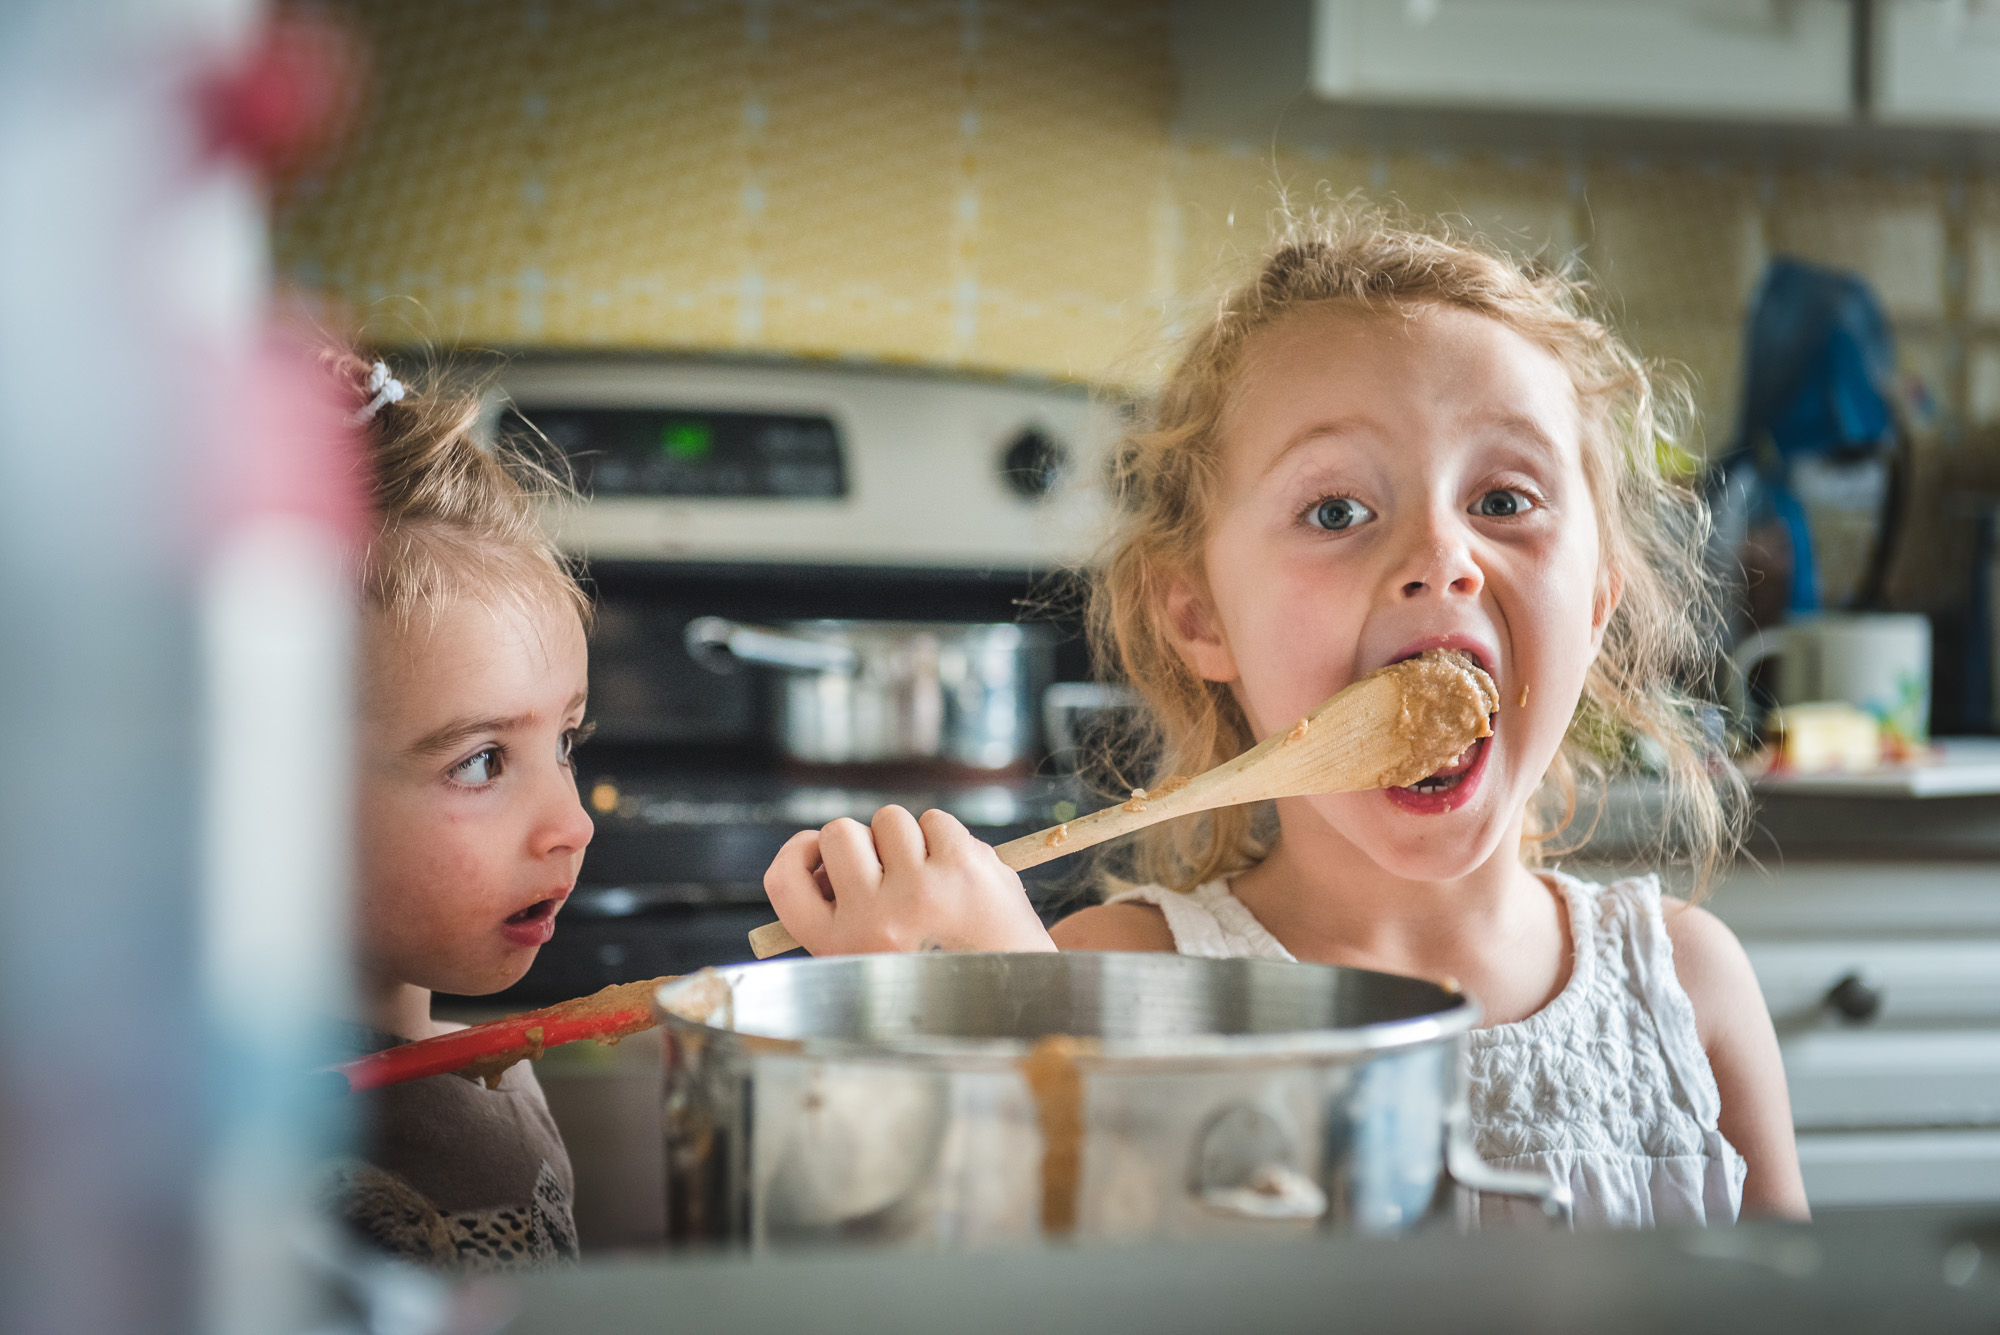 A little sister watches on as her big sister licks batter from a spoon